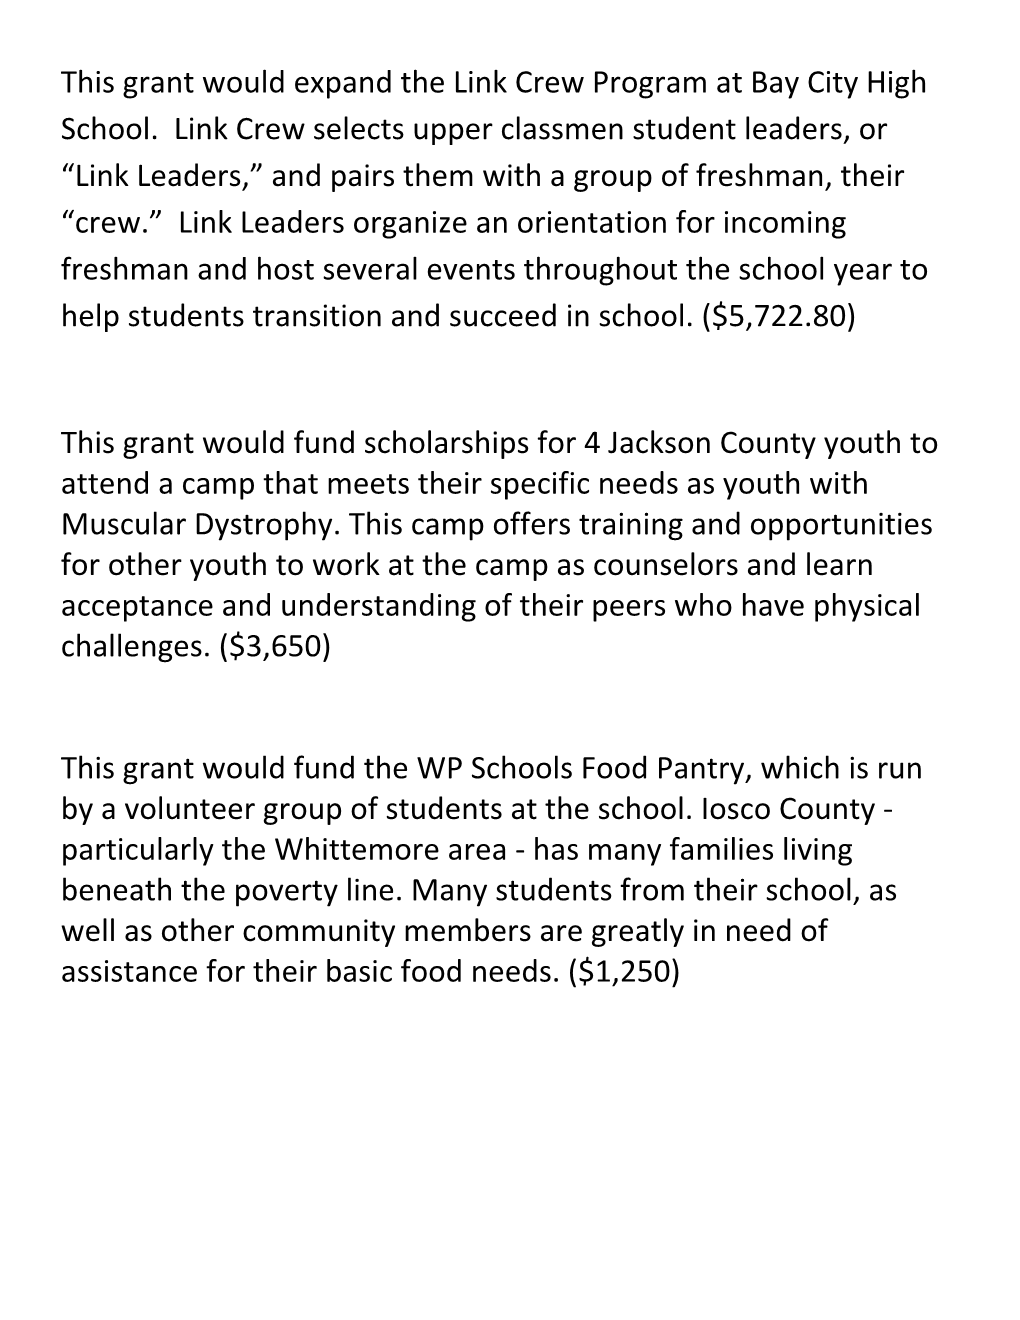 This Grant Would Expand the Link Crew Program at Bay City High School. Link Crew Selects